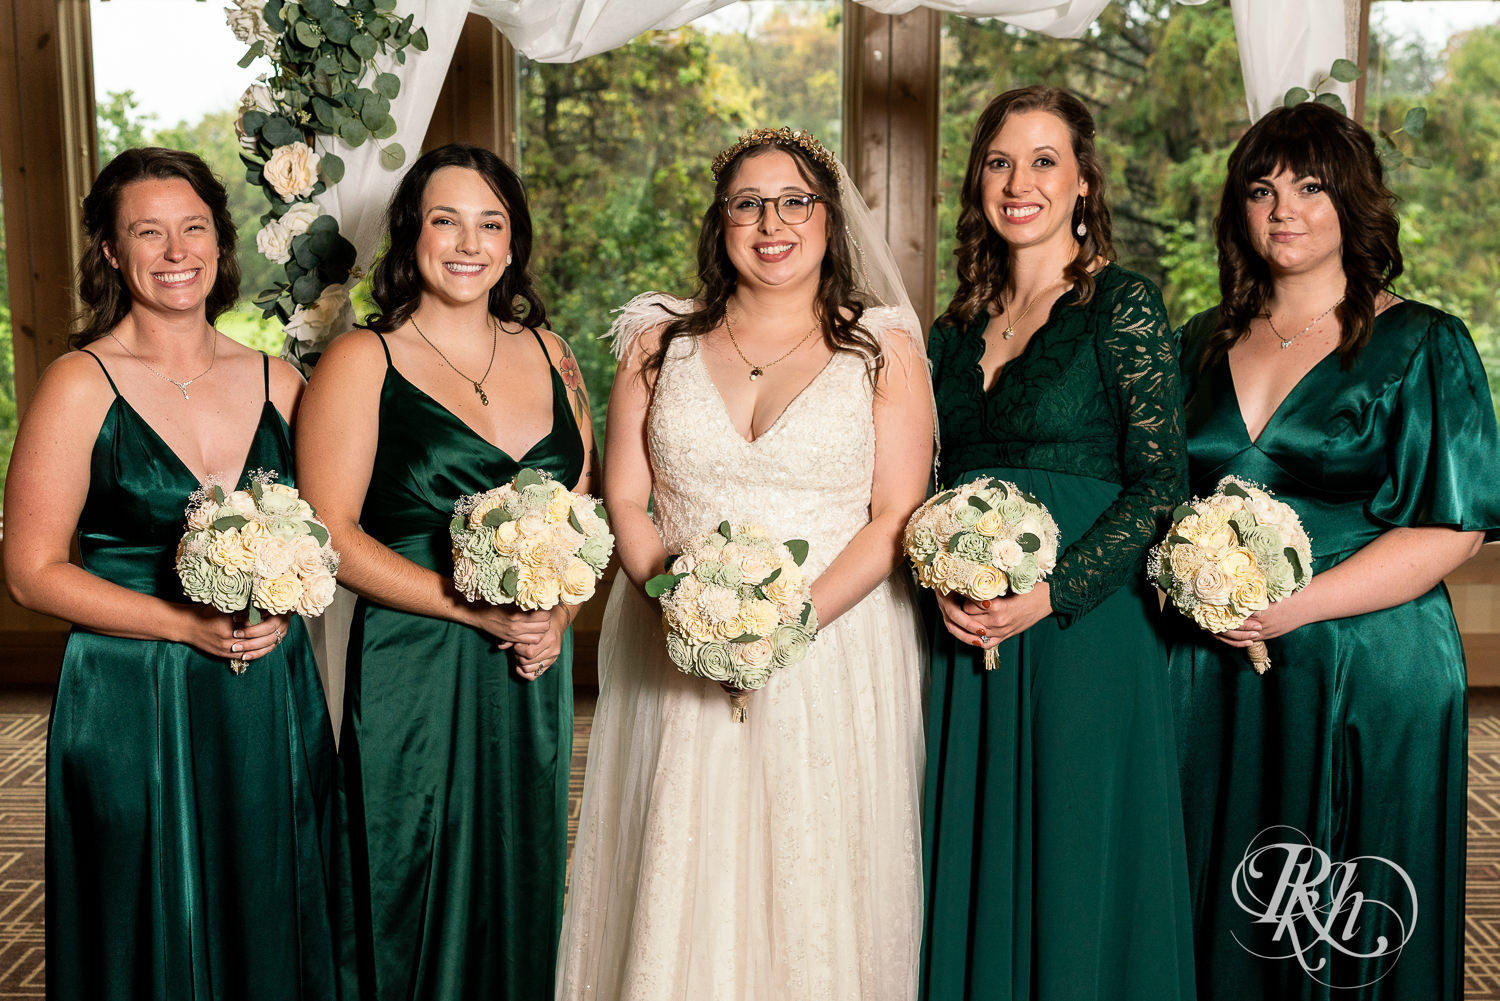 Bride smiles with wedding party at Bunker Hills Event Center in Coon Rapids, Minnesota.